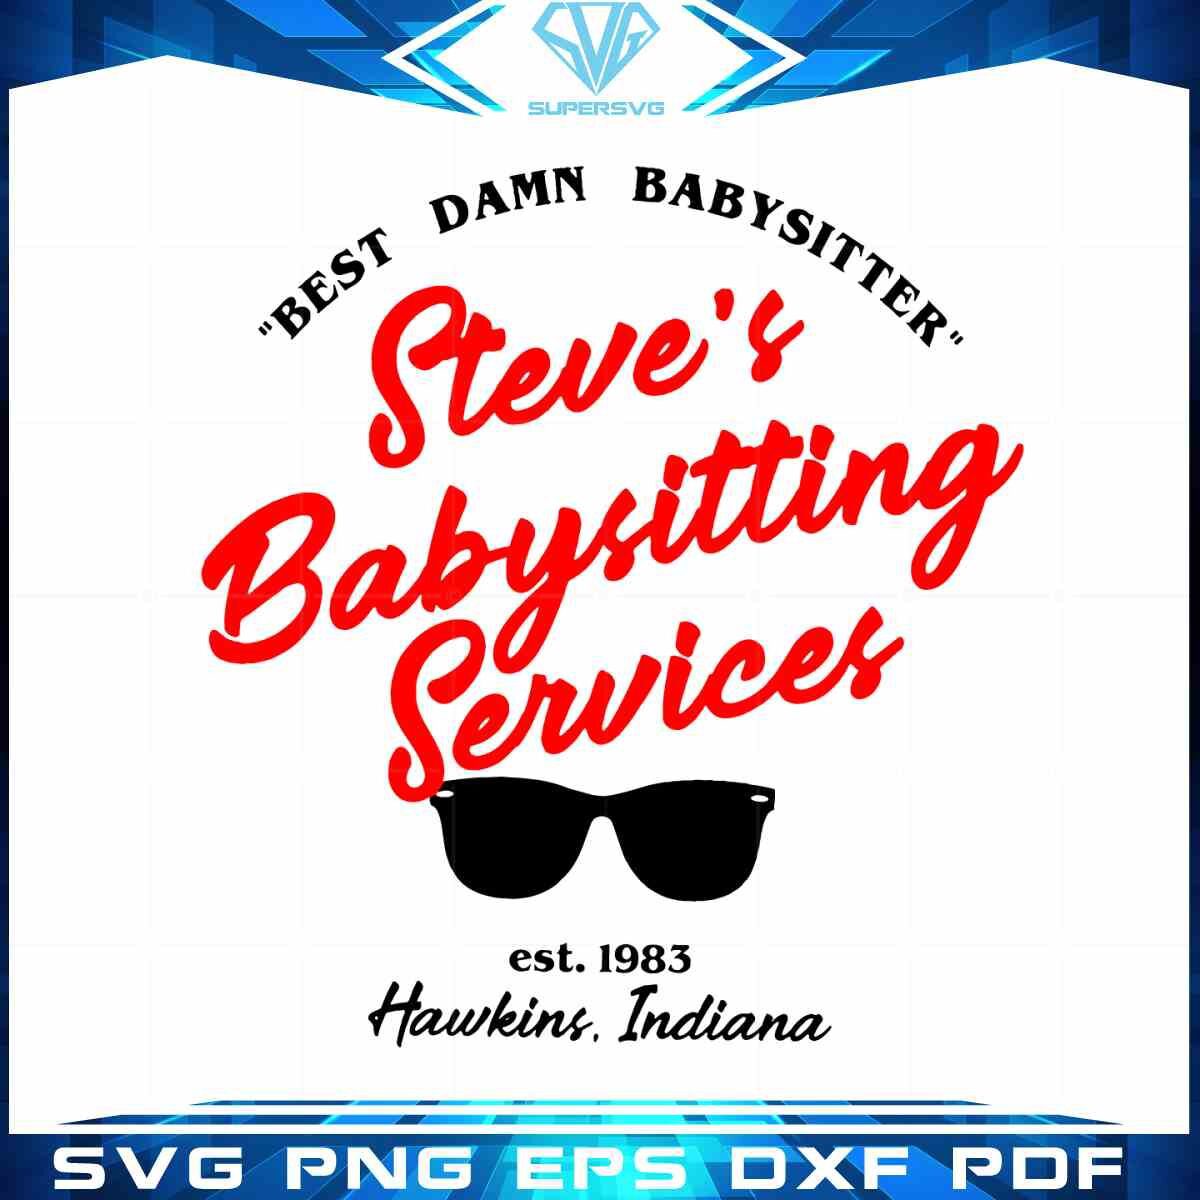 steves-babysitting-services-svg-best-graphic-designs-cutting-files